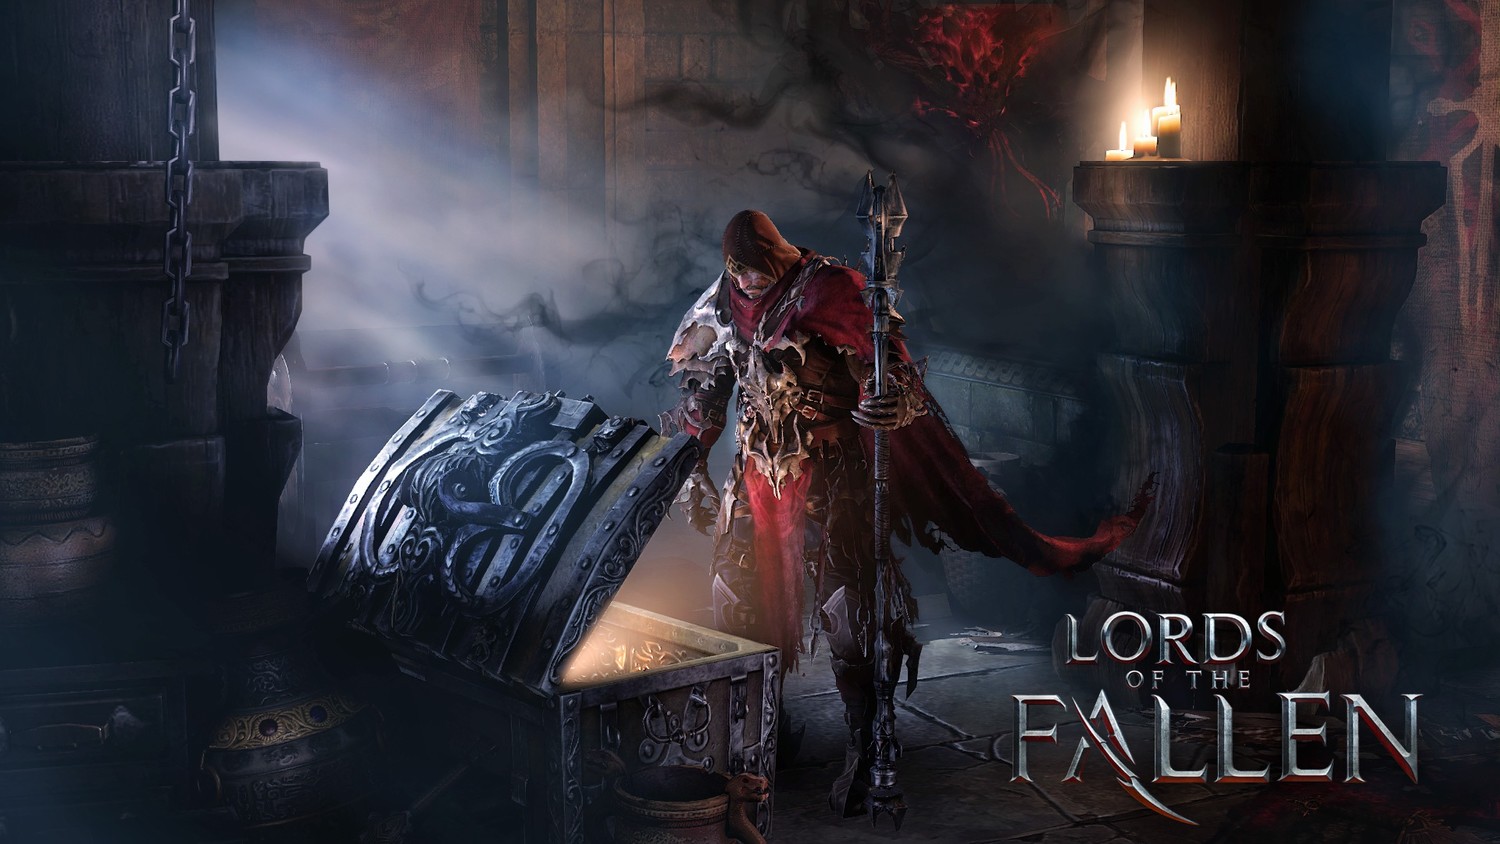 Скриншот 1 к игре Lords of the Fallen Game of the Year Edition (2014) PC | RePack от xatab